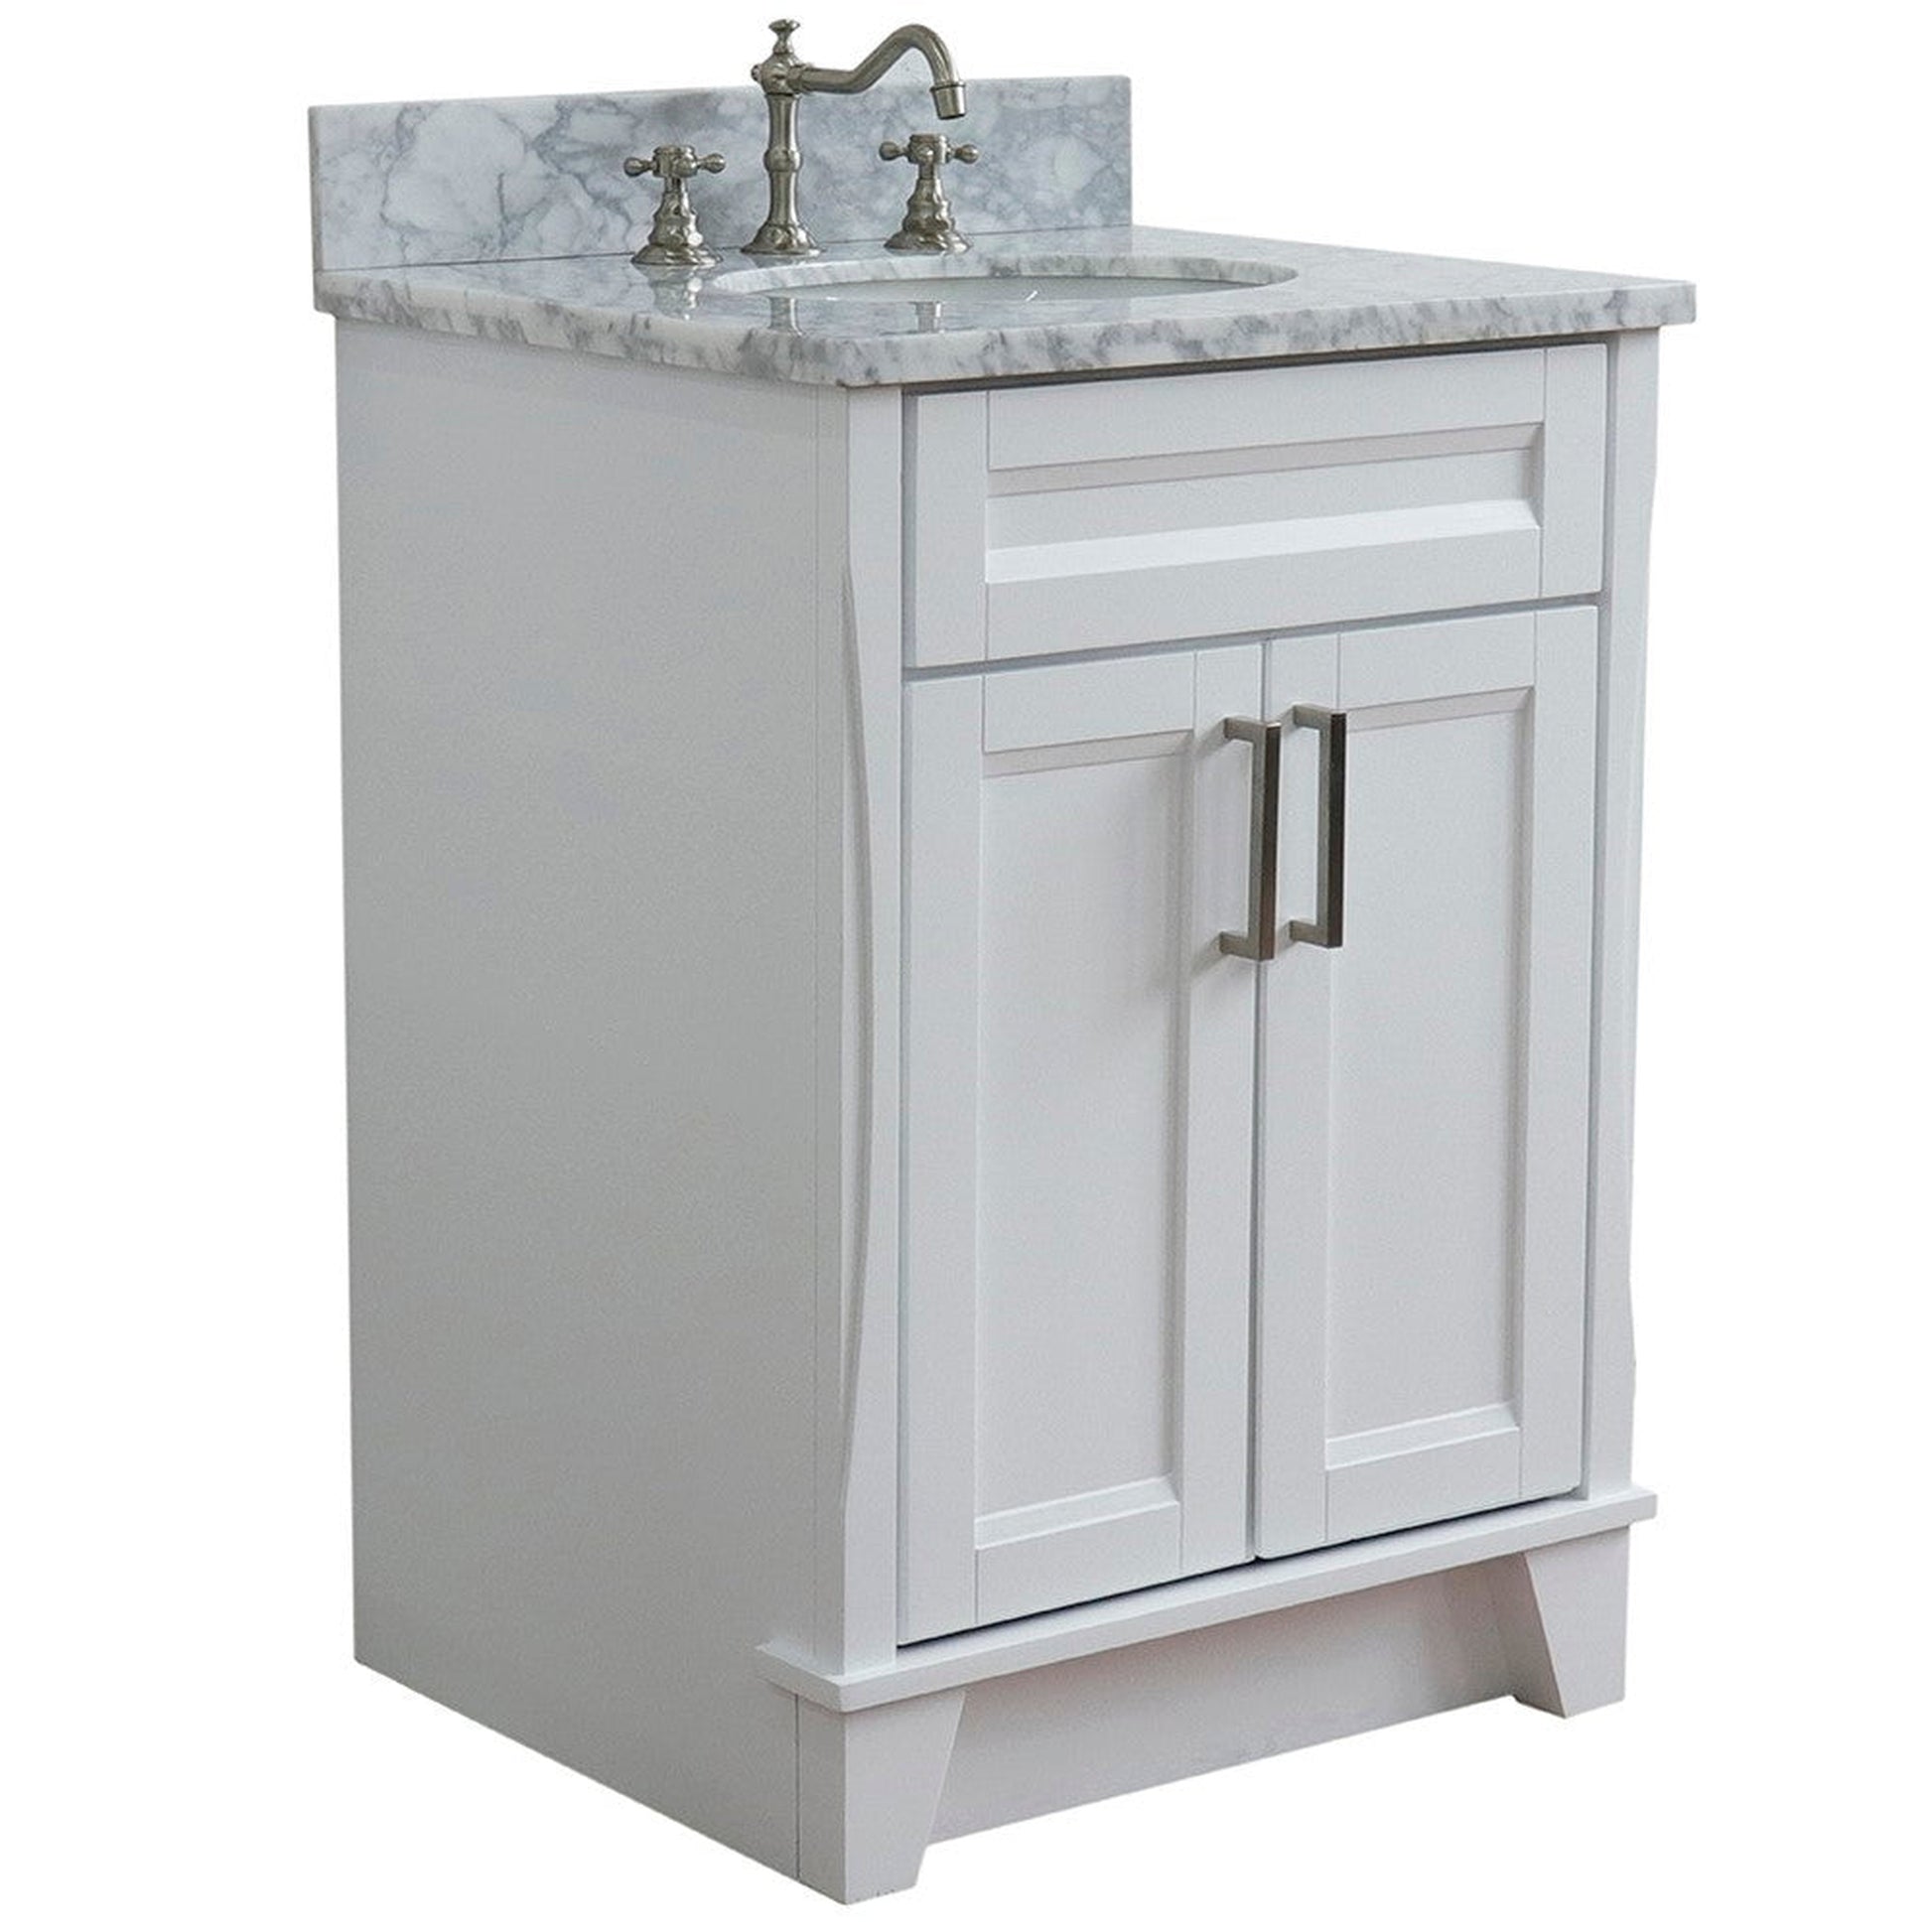 Bellaterra Home Terni 25" 2-Door 1-Drawer White Freestanding Vanity Set With Ceramic Undermount Oval Sink and White Carrara Marble Top